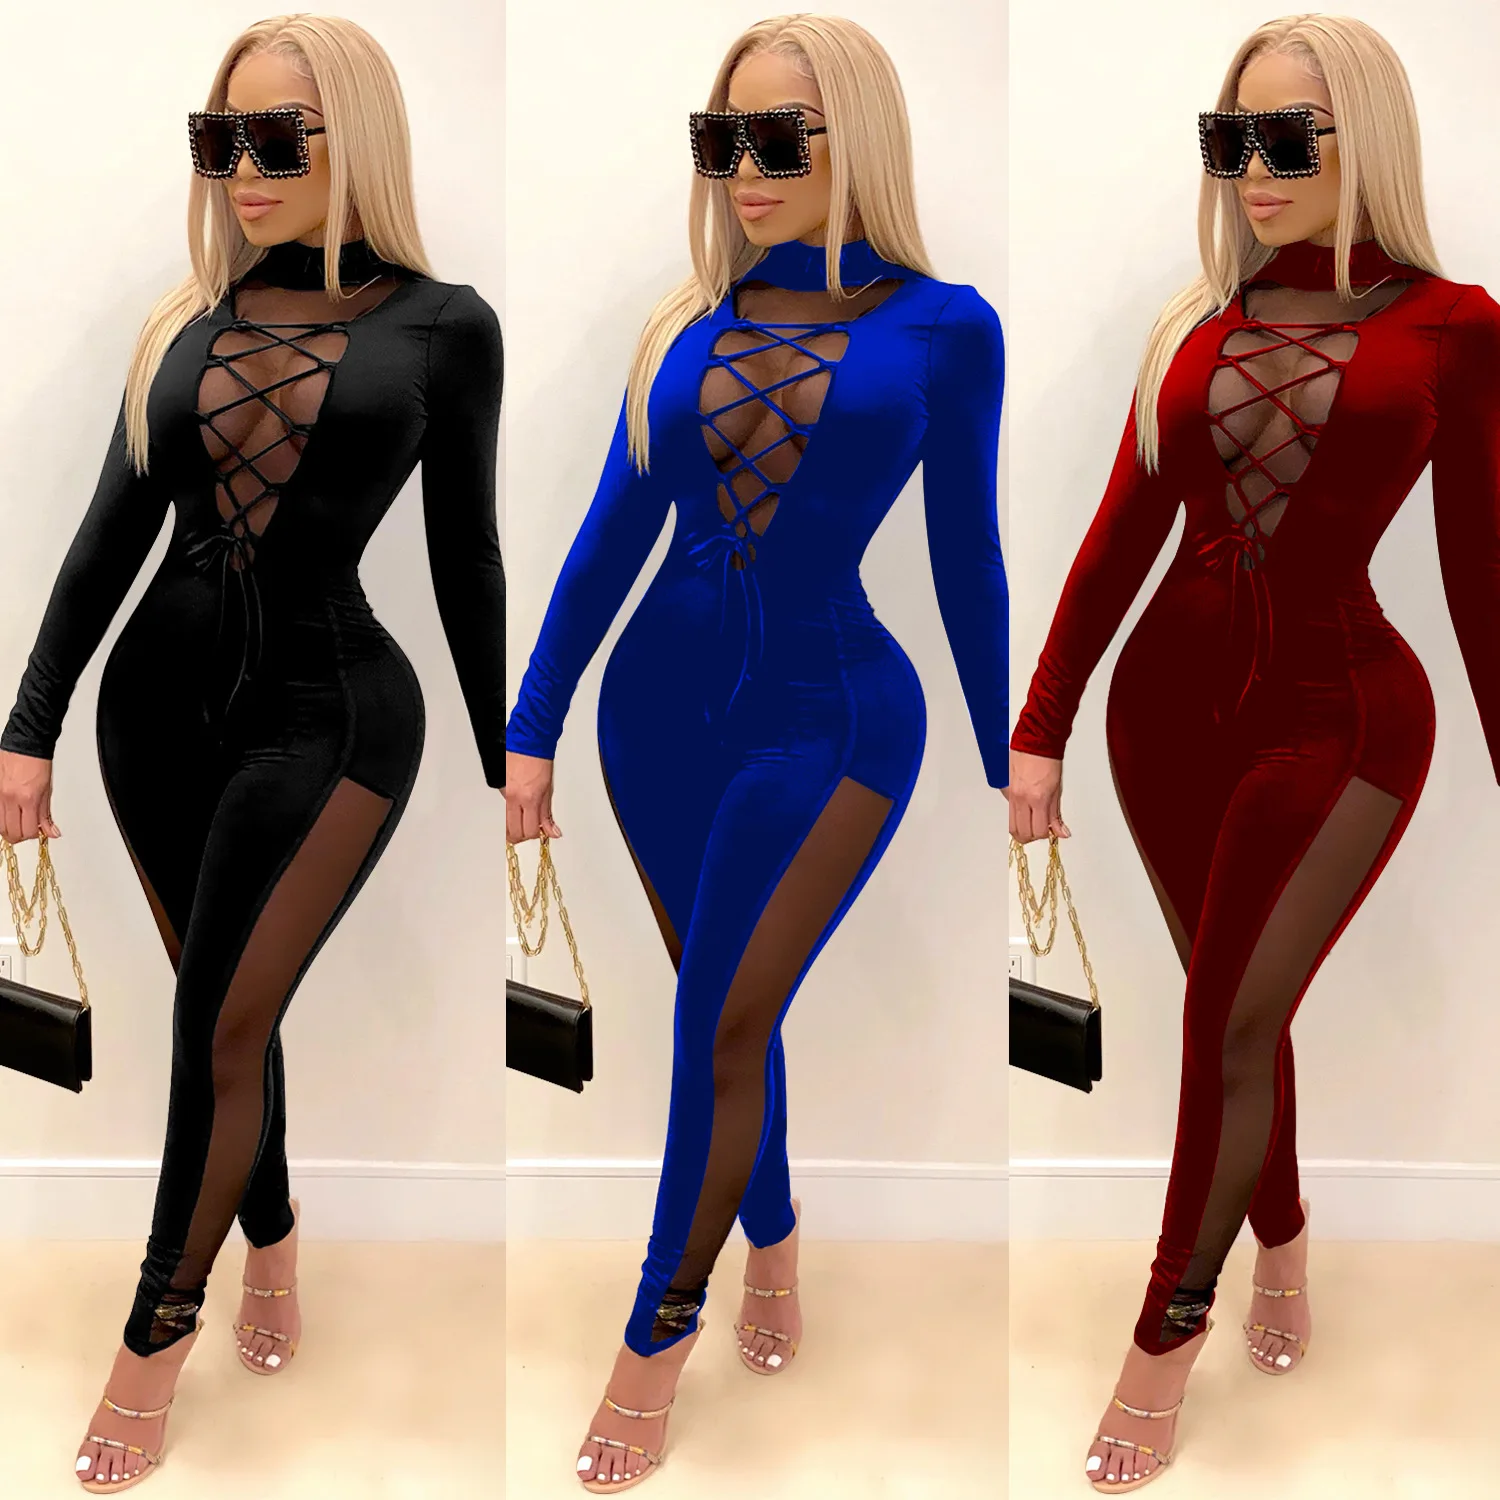 

C3898 winter new product fashion deep V perspective tight sexy solid color women's jumpsuit, Black red